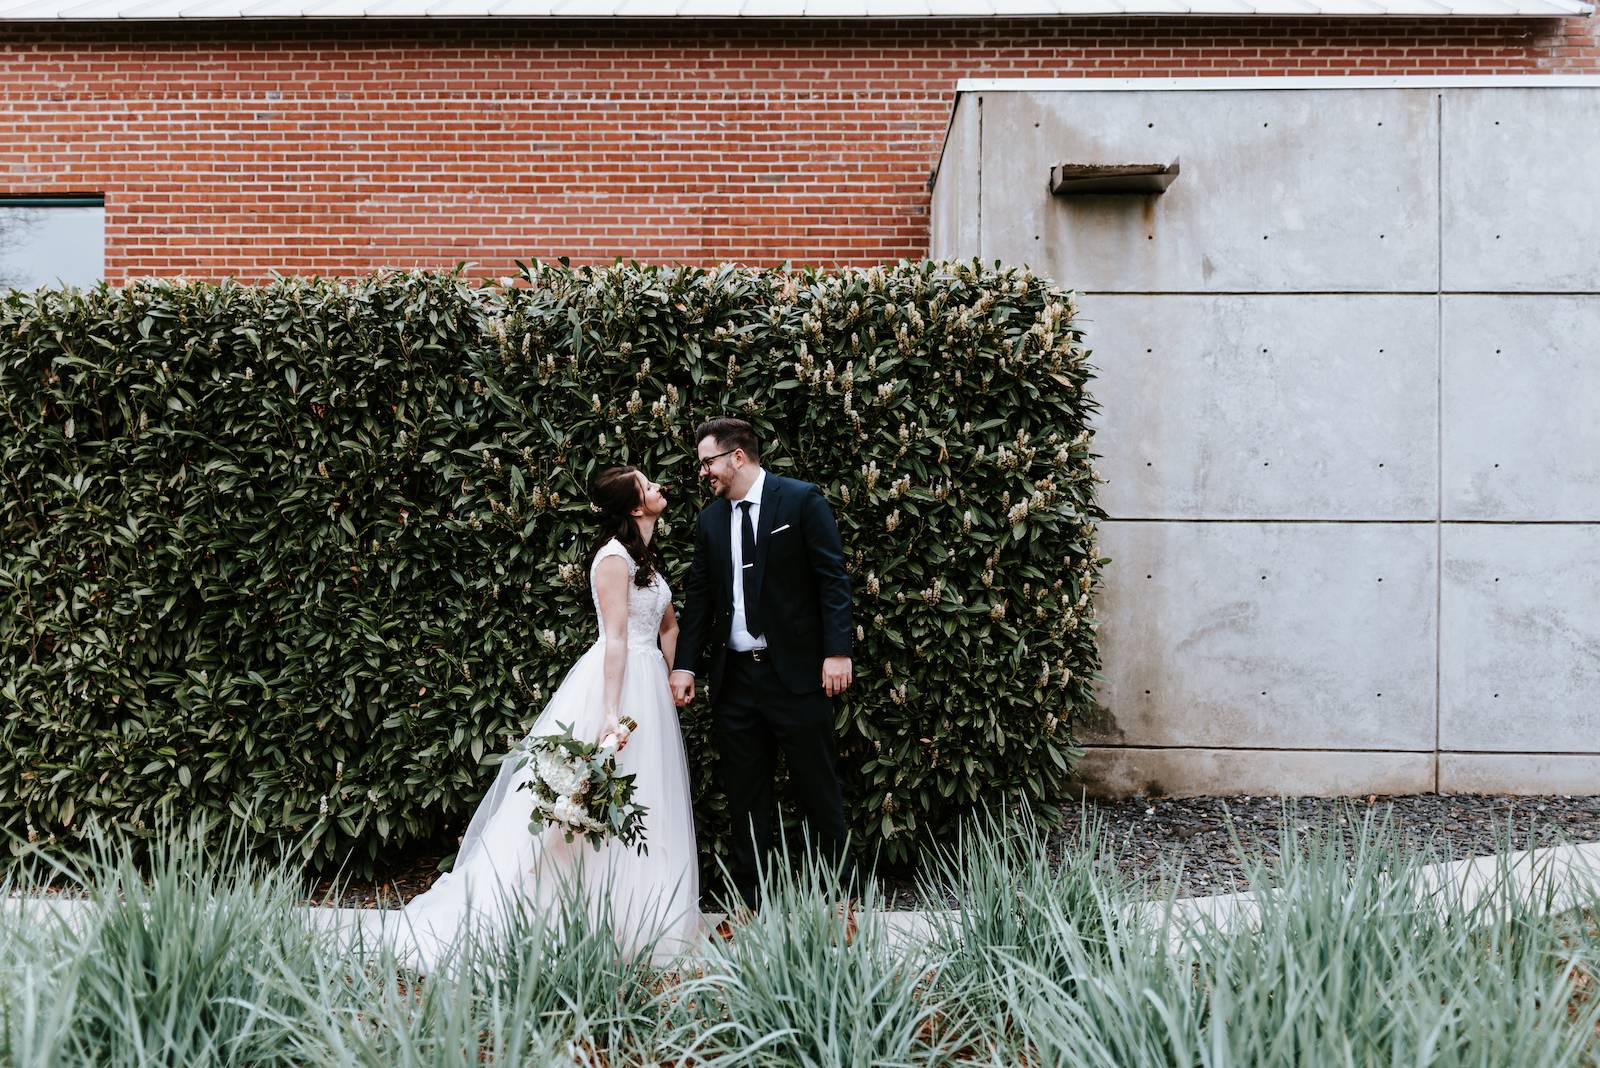 Becca + Tommy’s Sweet, Modern Wedding at Ruby by Eden Ingle |  Nashville Real Wedding